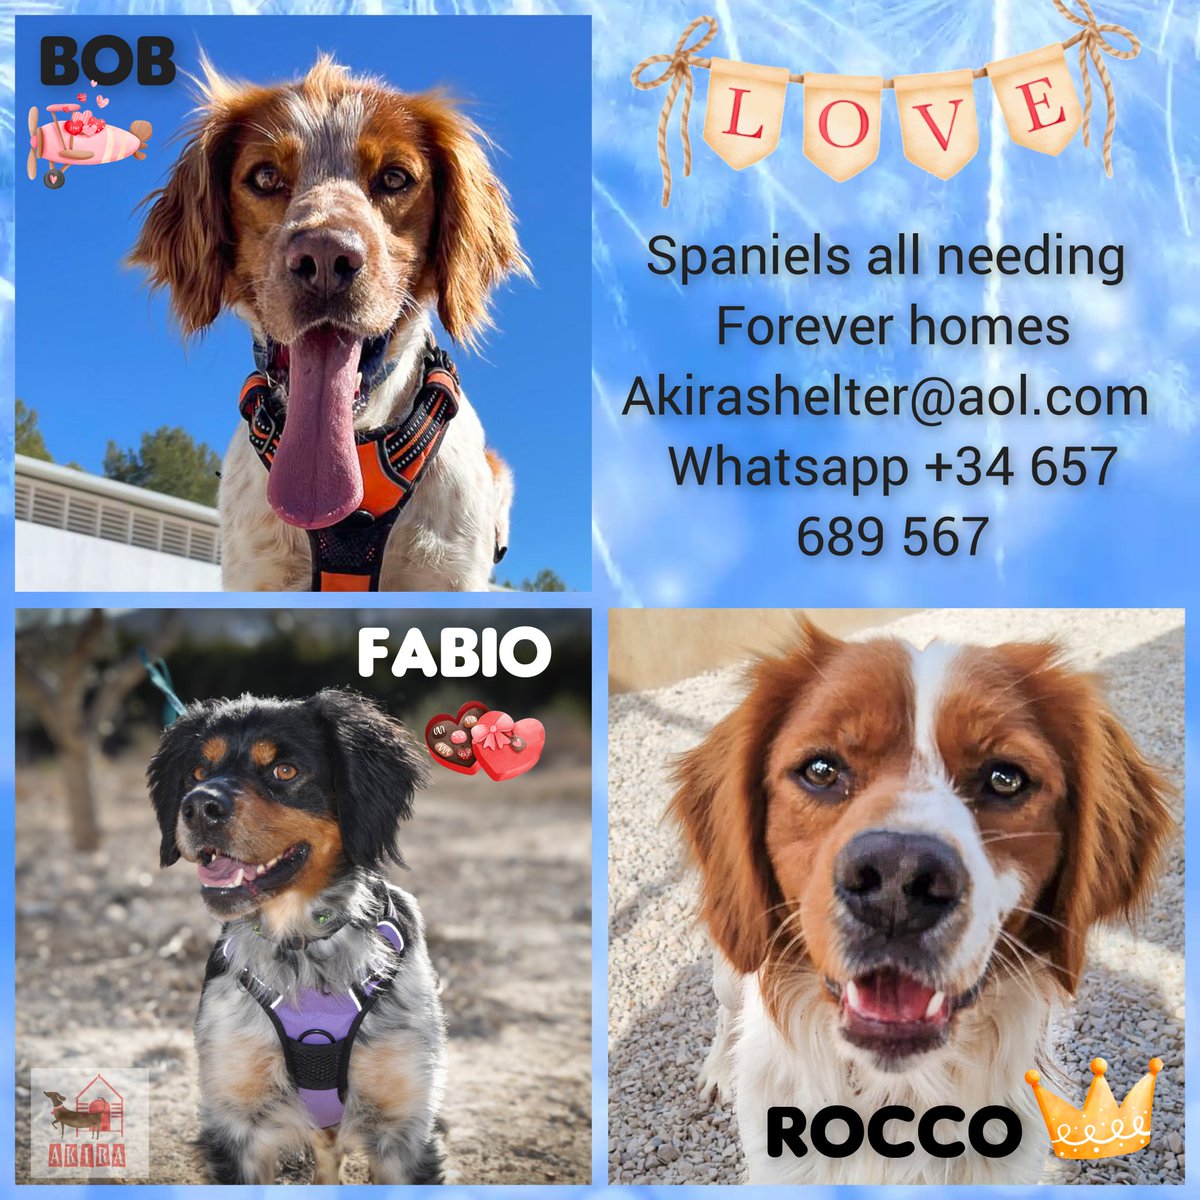 These gorgeous 3 Spaniels all need forever homes. Can you help they are all lovely and all failed hunters as they just wanted to be pets and have cuddles.. 
#teamzay #rehomehour @MillieOTLFP @LisaClareRead2 @chrisndigndoug @Dubs4Mutts @MetalPoisoning @Nightowl400 @catgirl321